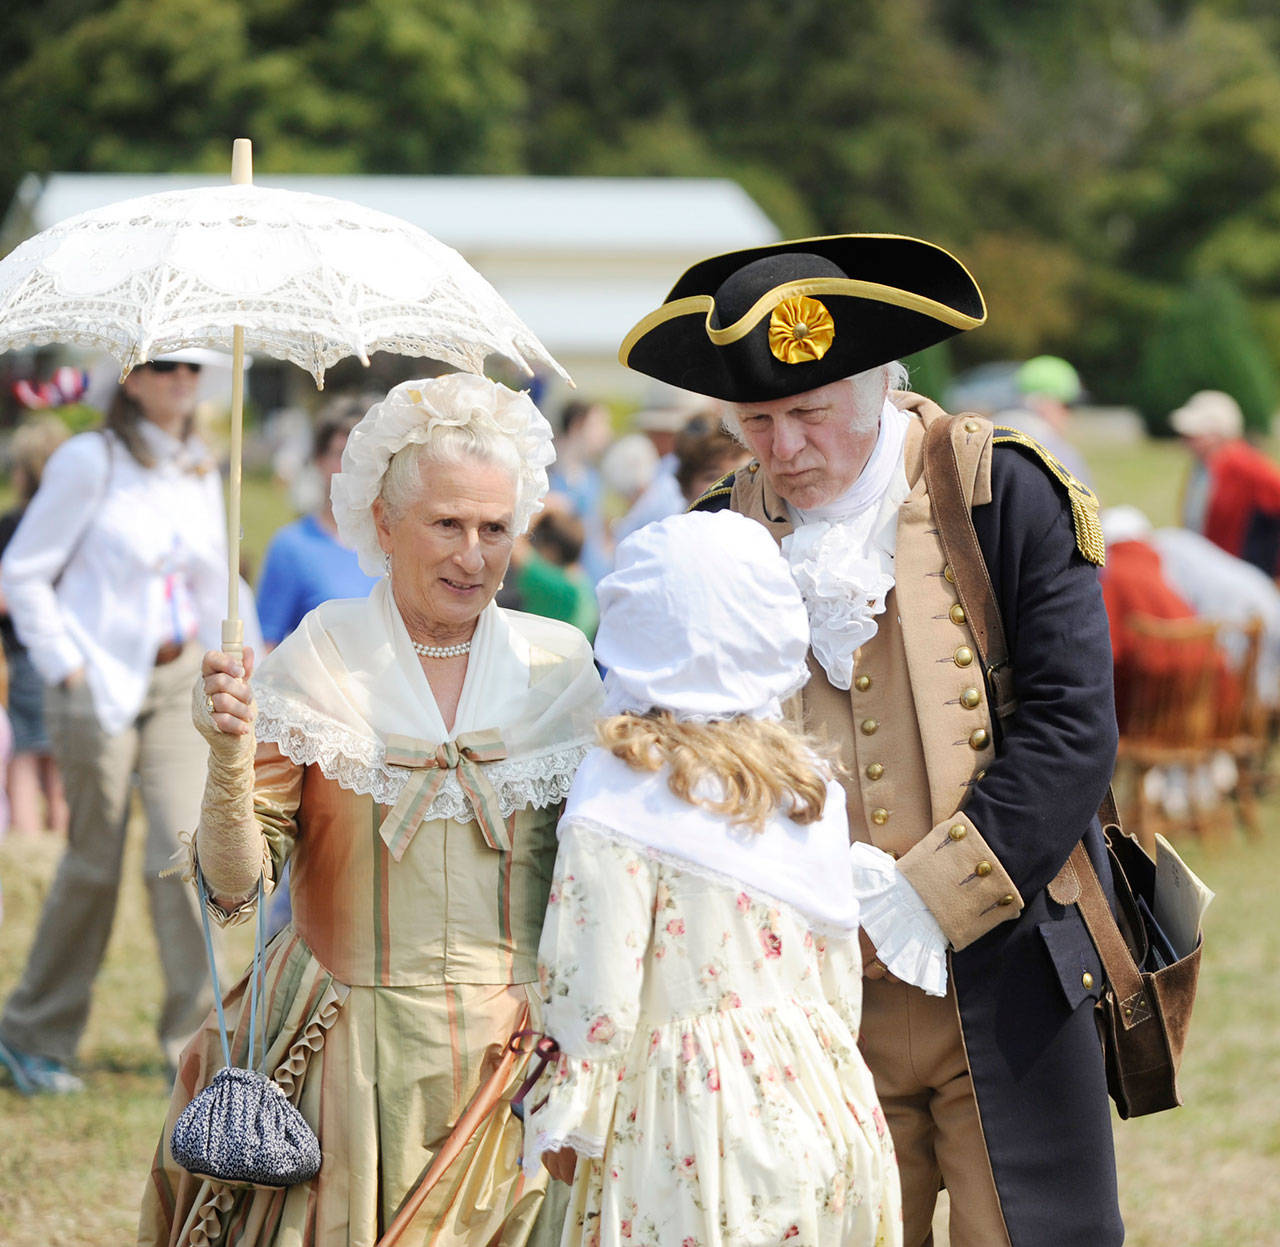 Martha Washington (Jane Ritchey) and George Washington (Vern Frykholm Jr.) meet with a young visitor at the Northwest Colonial Festival in 2019. The pair return this year from Thursday through Sunday for daily visits with guests. (Michael Dashiell/Olympic Peninsula News Group)